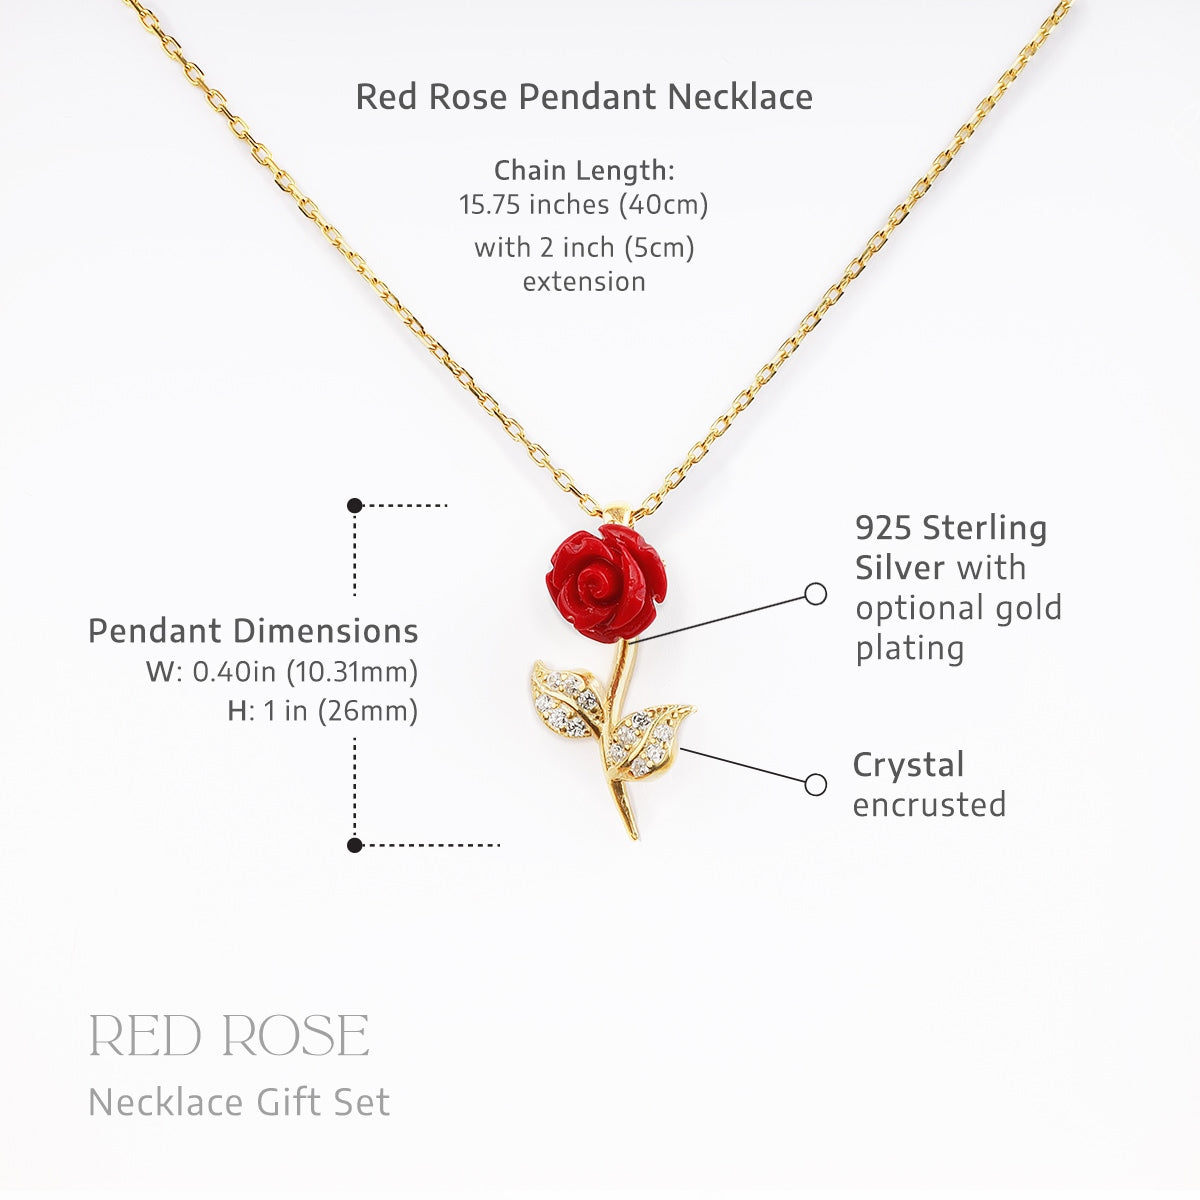 To My Aunt the Beauty - Red Rose Necklace Gift Set